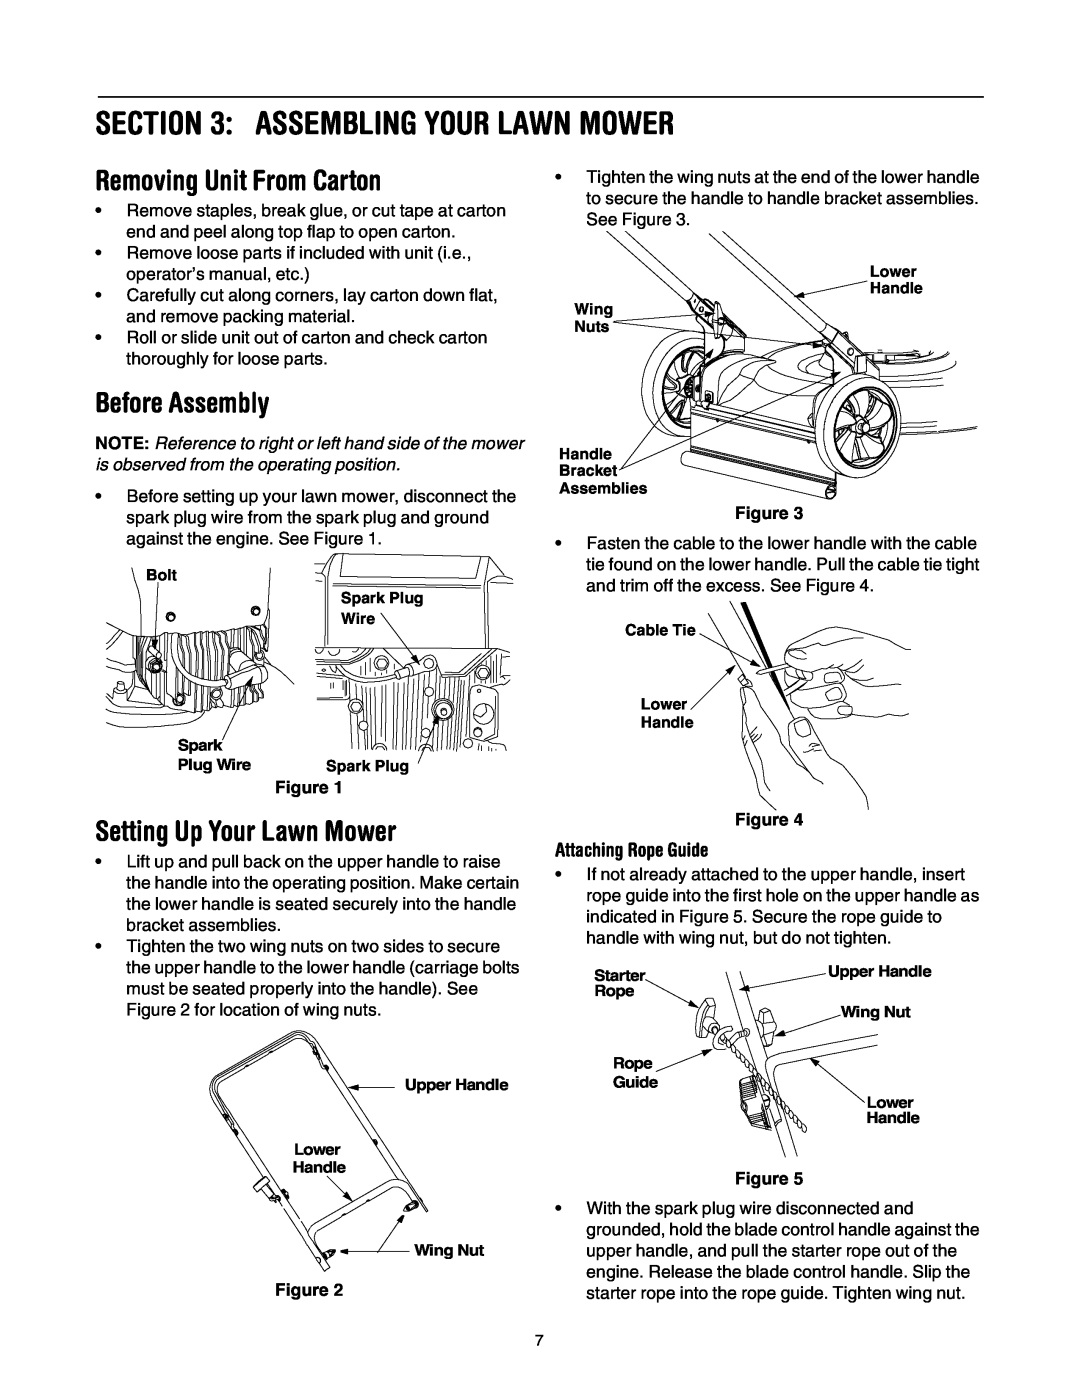 Bolens 84 manual Assembling Your Lawn Mower, Removing Unit From Carton, Before Assembly, Setting Up Your Lawn Mower 